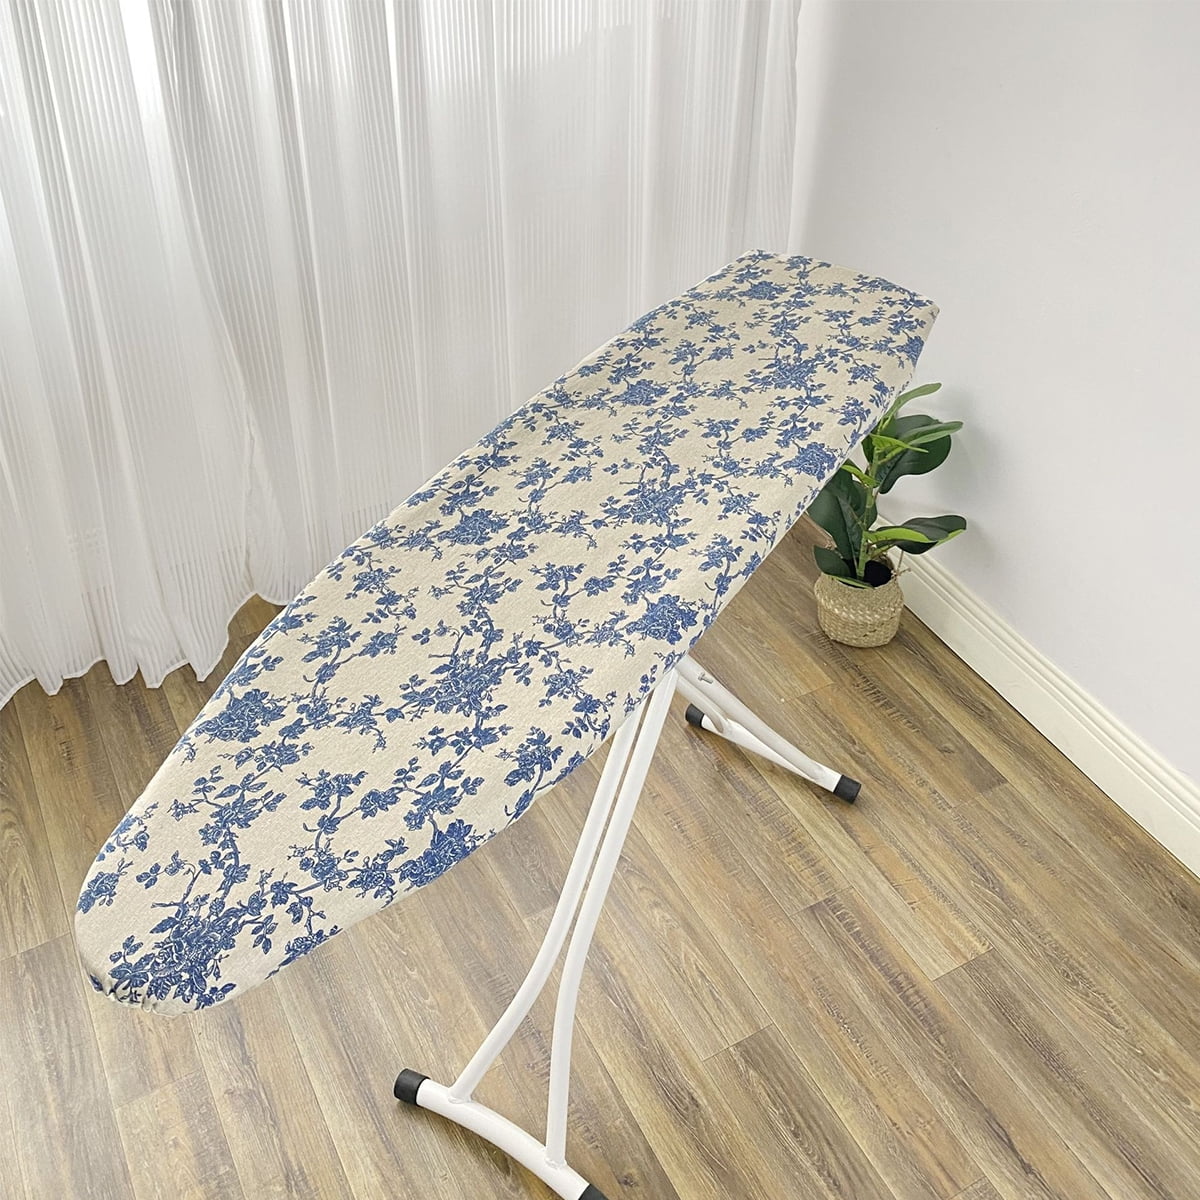 I made this mini ironing board cover with thrifted fabric! Travel